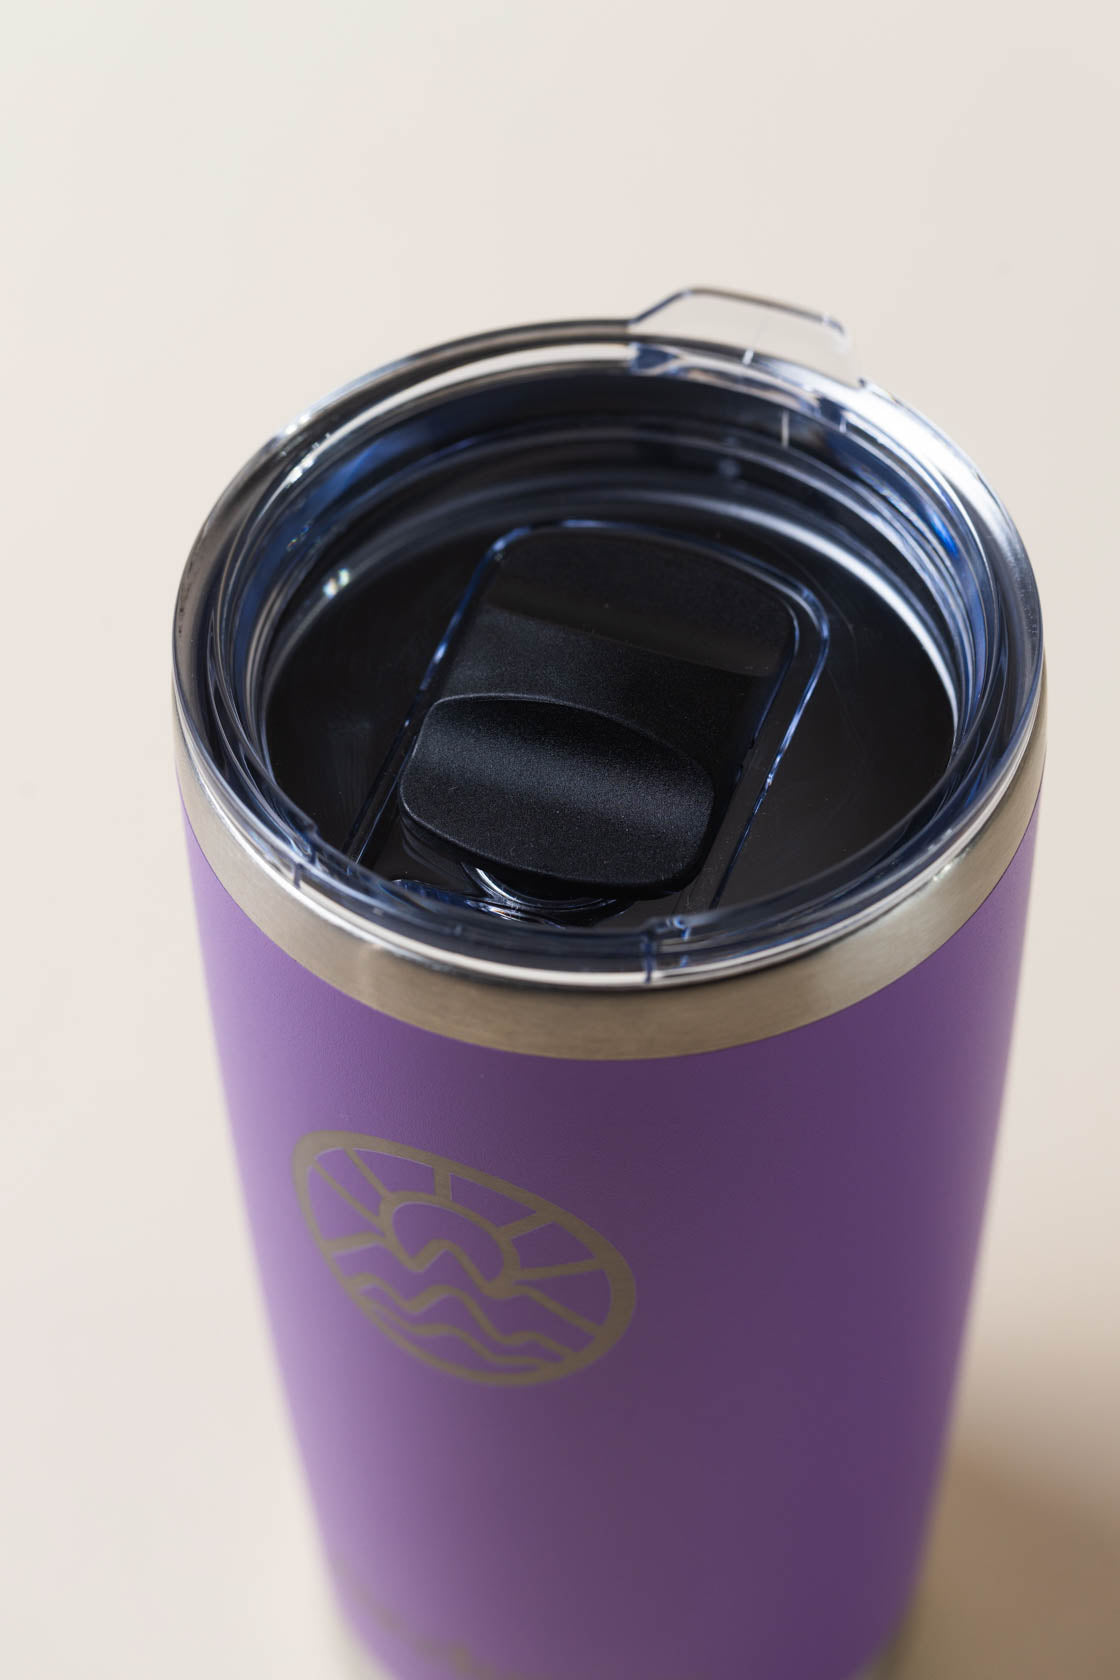 Tumbler - 20 oz Stainless Steel Insulated - Purple